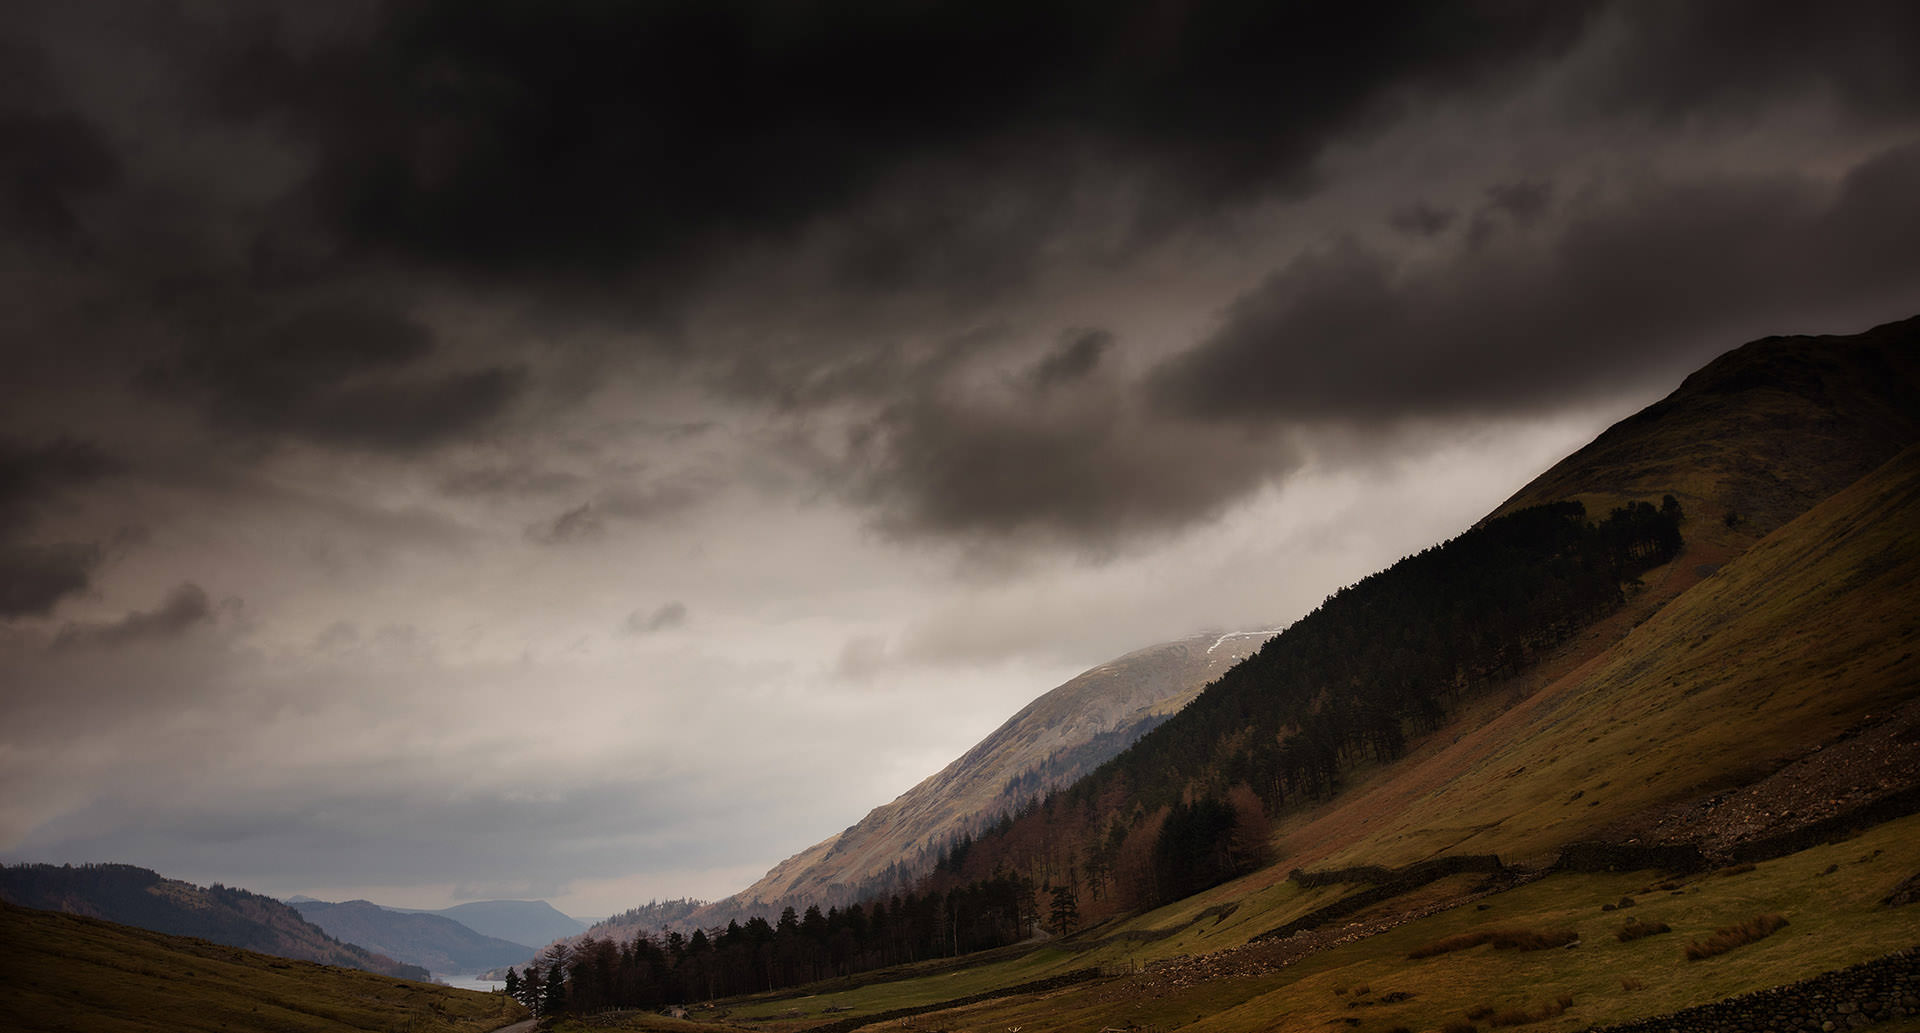 A stormy sky over a valley with mountains in the background.